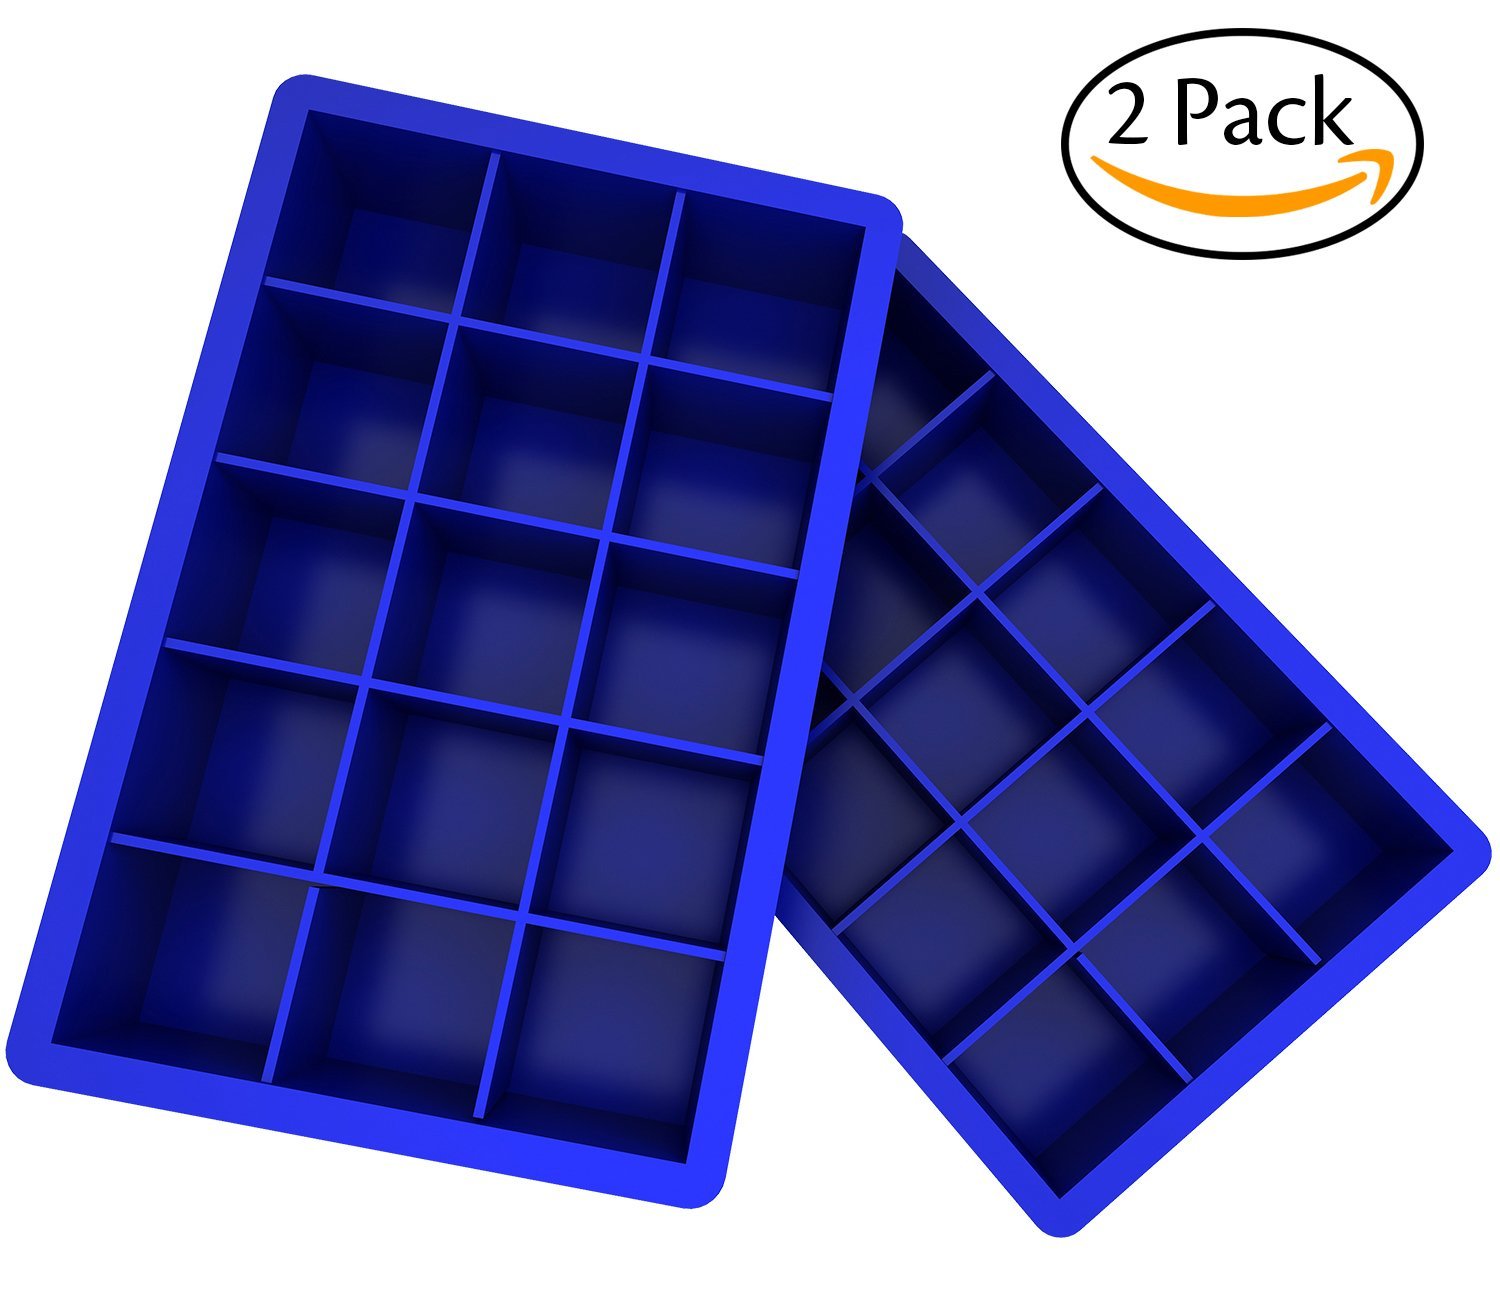 Webake 2-Pack Silicone Ice Cube Tray Molds , Large 2 inch Cubes (Blue)